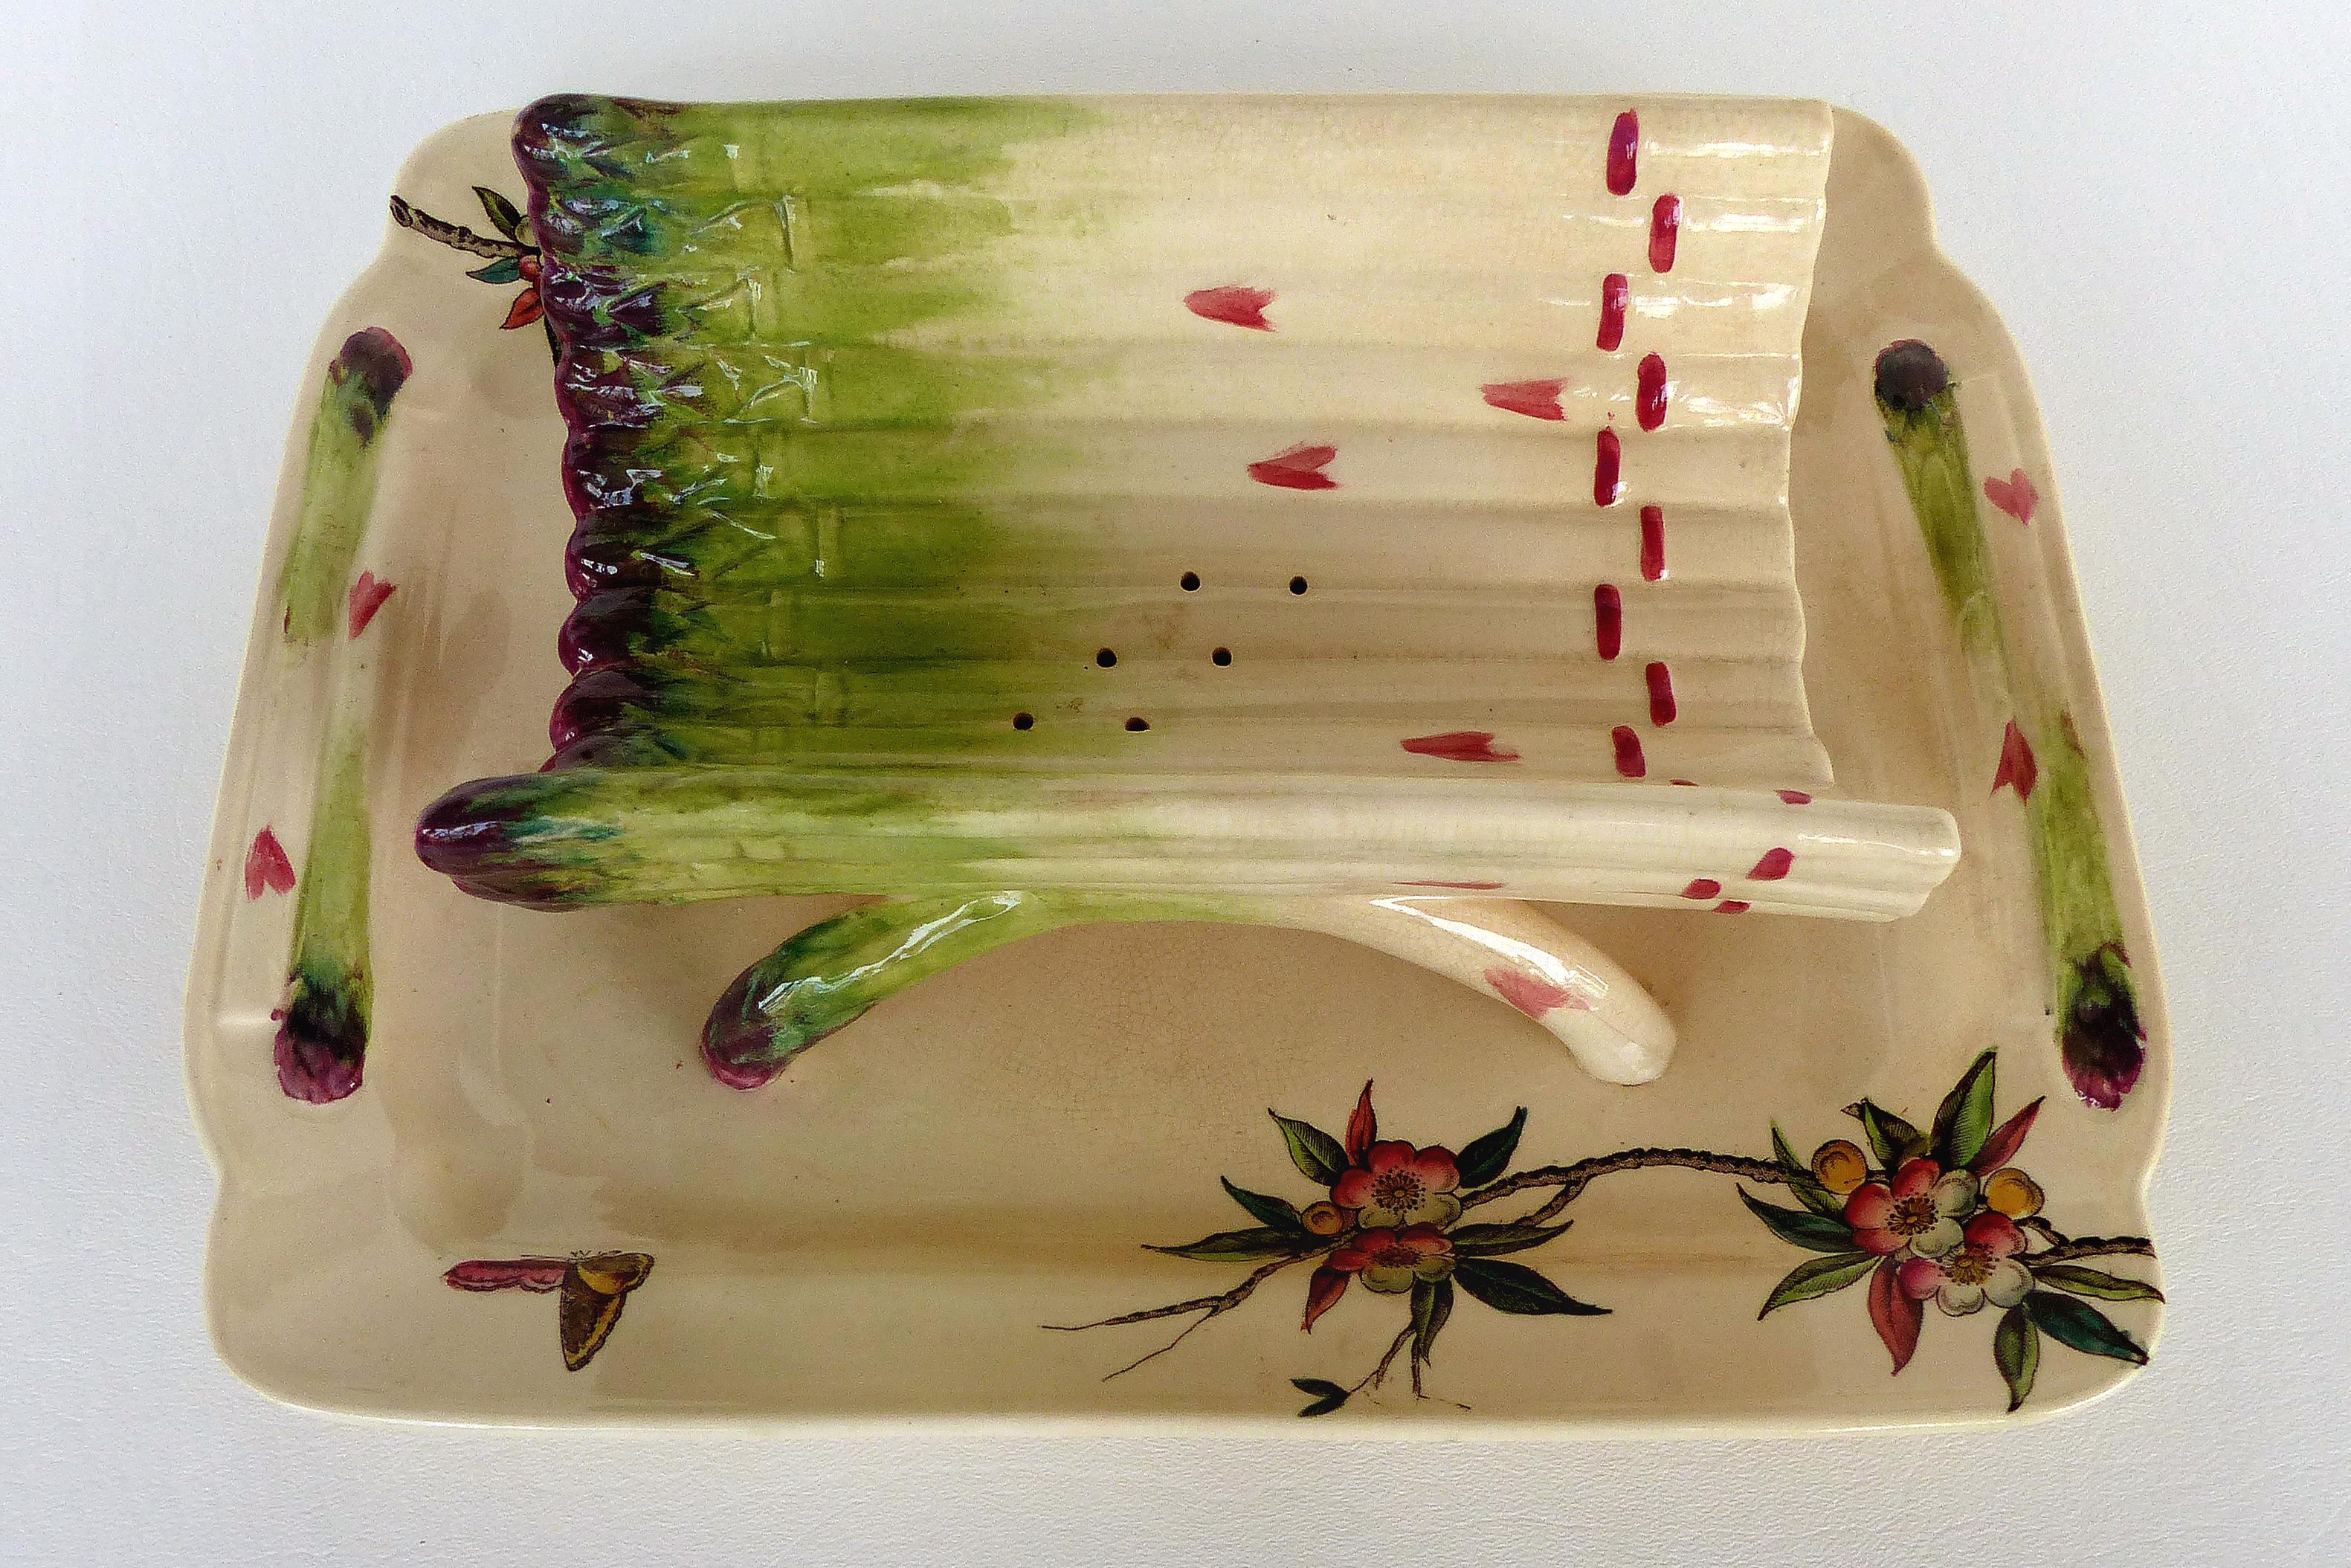 French Faience Asparagus Strainer and Serving Dish

Offered for sale is a late 19th-century hand-painted French faience asparagus strainer and serving dish. The underplate portion is hand-decorated with flowers and bird motifs of the period. There